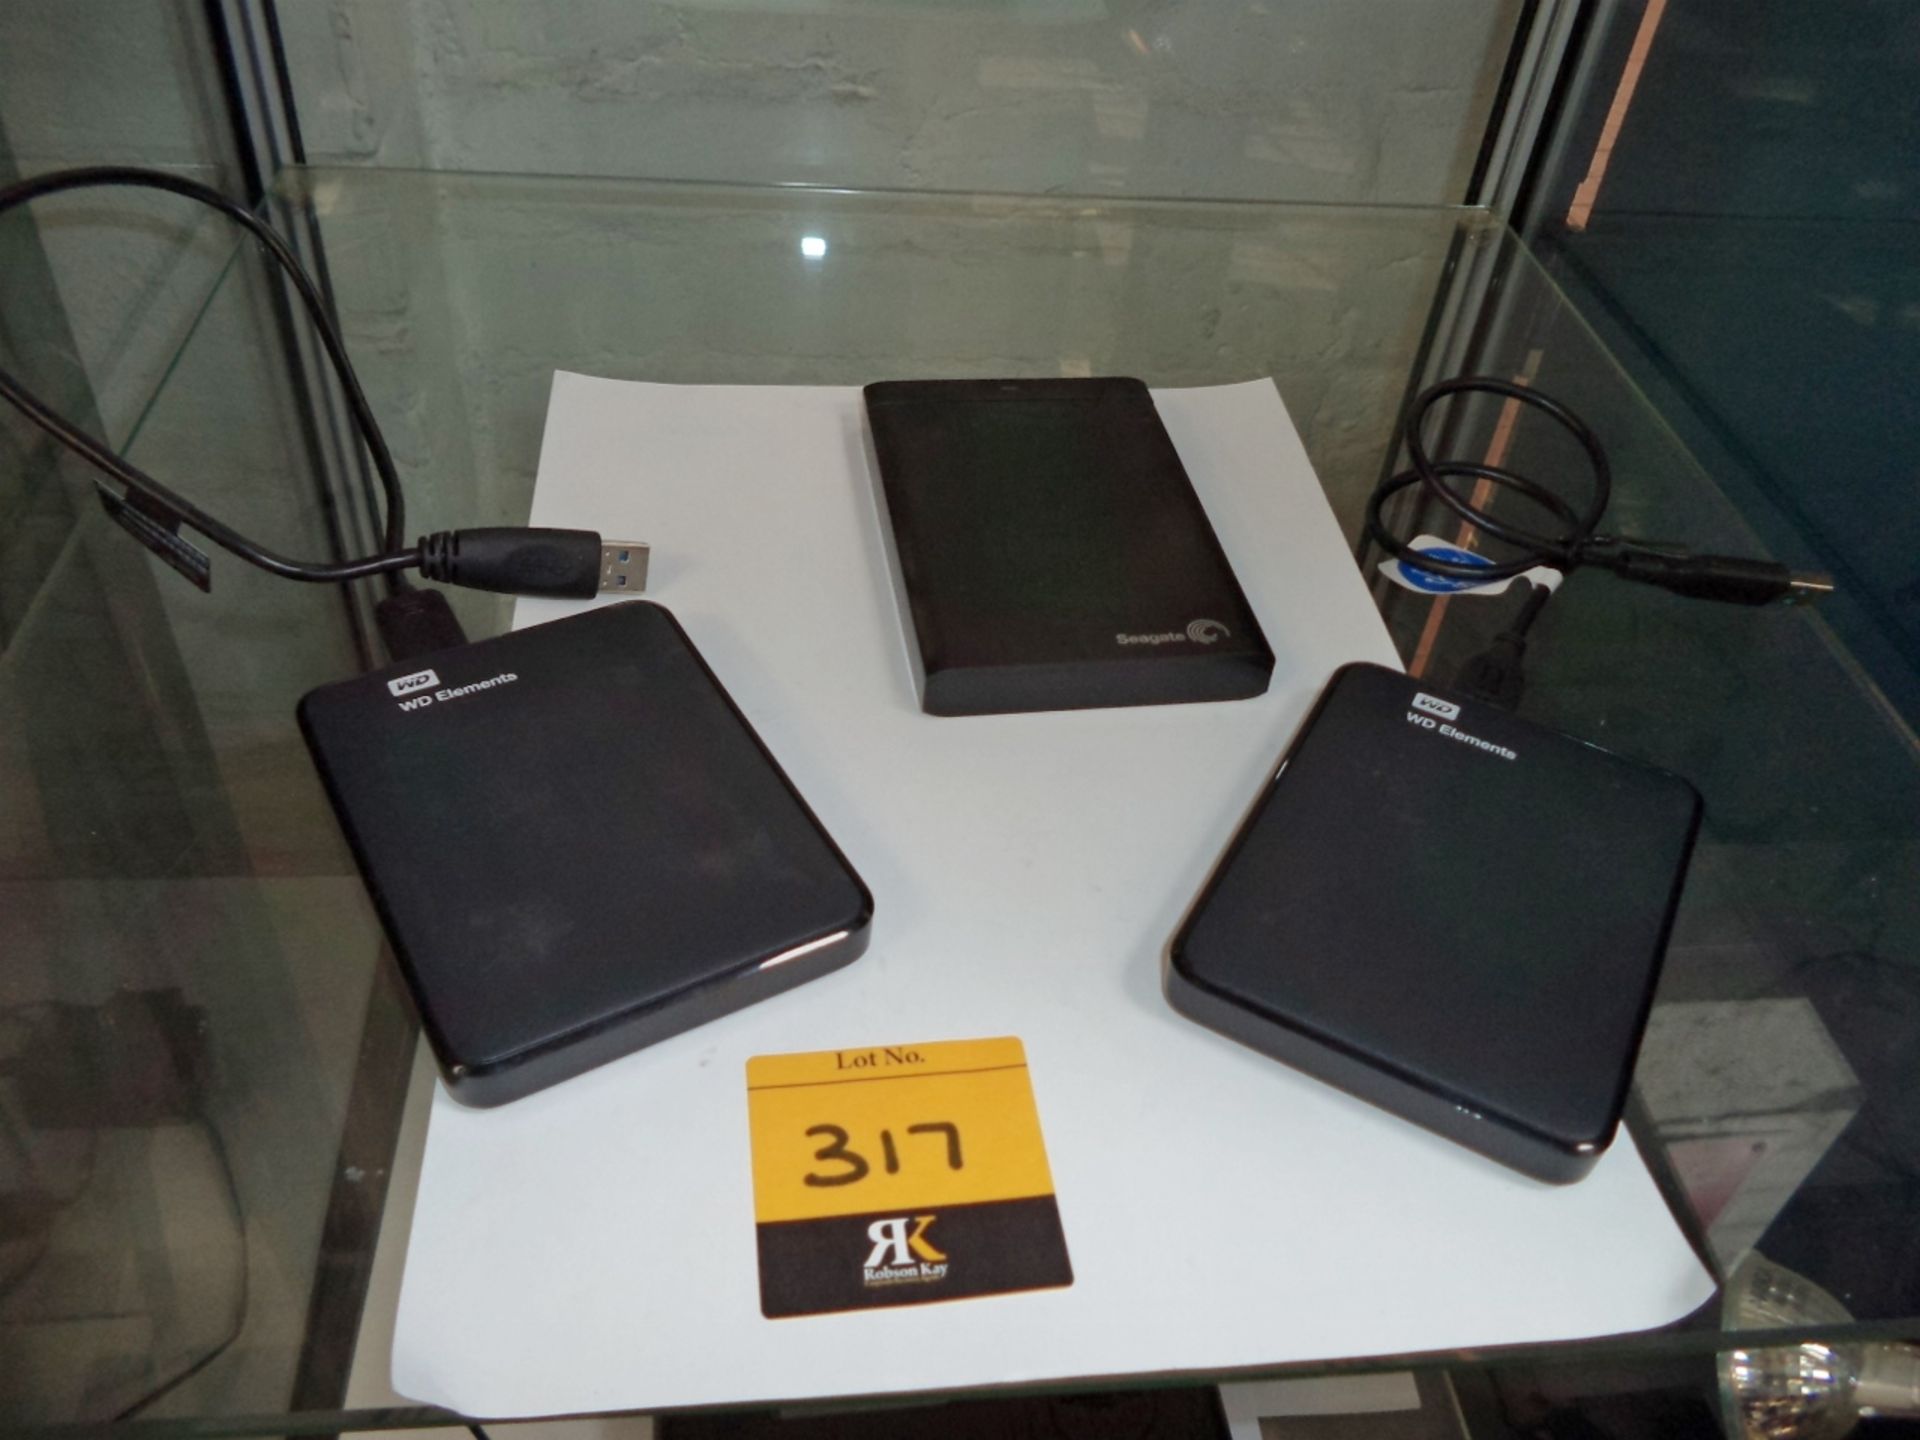 3 off assorted external hard drives, consisting of 2 Western Digital 1Tb drives, part number